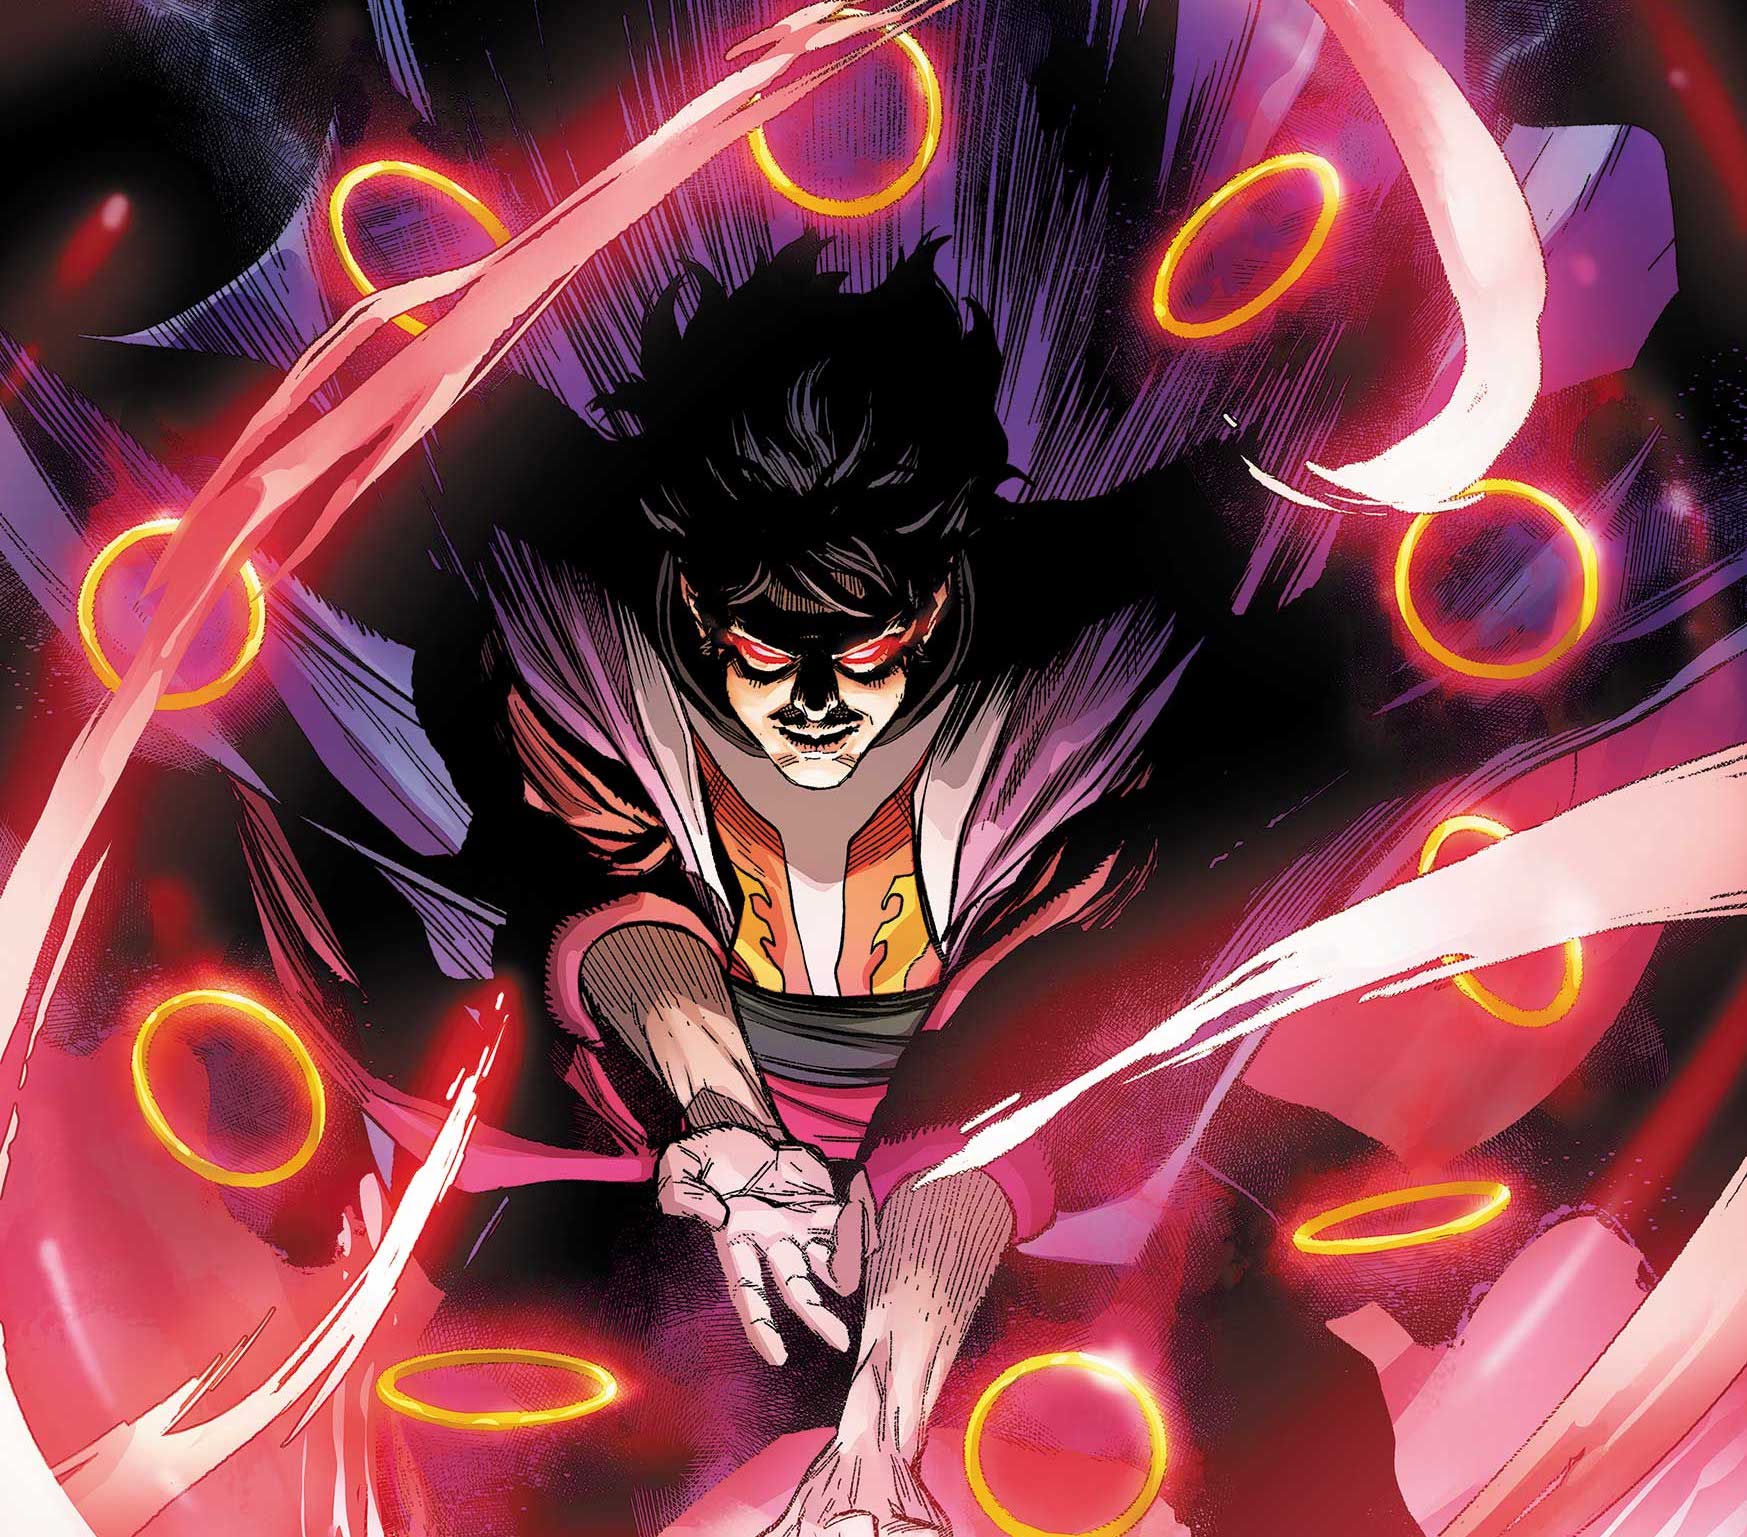 Shang-Chi is destined to wield the Ten Rings in 'Shang-Chi' #12